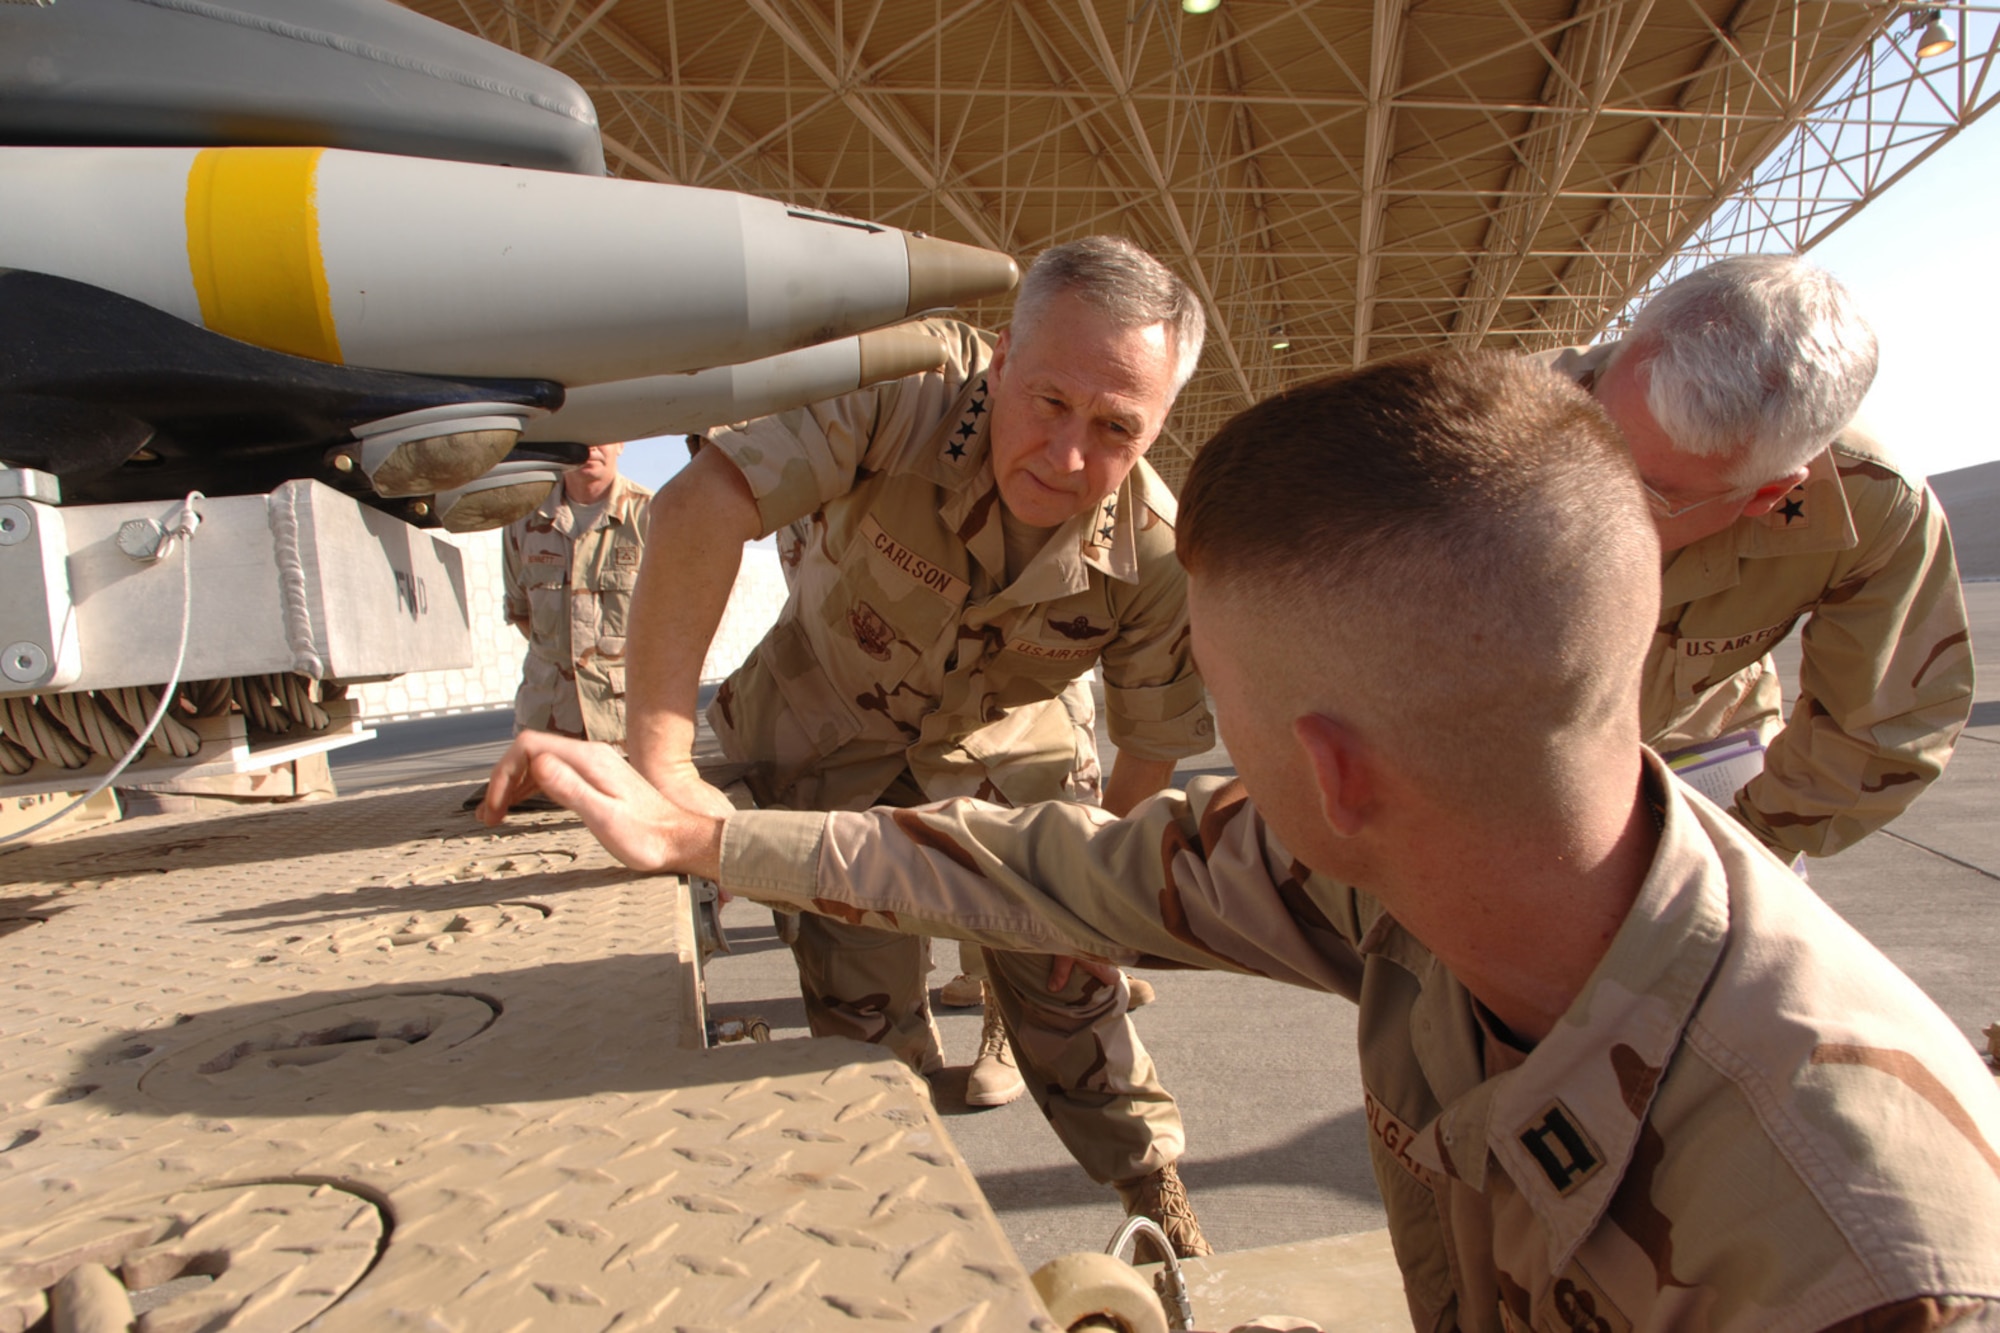 During his January visit to southwest Asia, Gen. Bruce Carlson, commander of Air Force Materiel Command, receives a briefing from Capt. Shad Colgate on the functionality of the Air Force's newest munition - the 250-pound Small Diameter Bomb. Captain Colgate is deployed from RAF Lakenheath, England, as officer-in-charge of the 494th Expeditionary Maintenance Squadron's Munitions Flight. Looking on is AFMC Logistics Director Maj. Gen. Arthur Morrill. (Air Force photo by Master Sgt. Scott Wagers)

